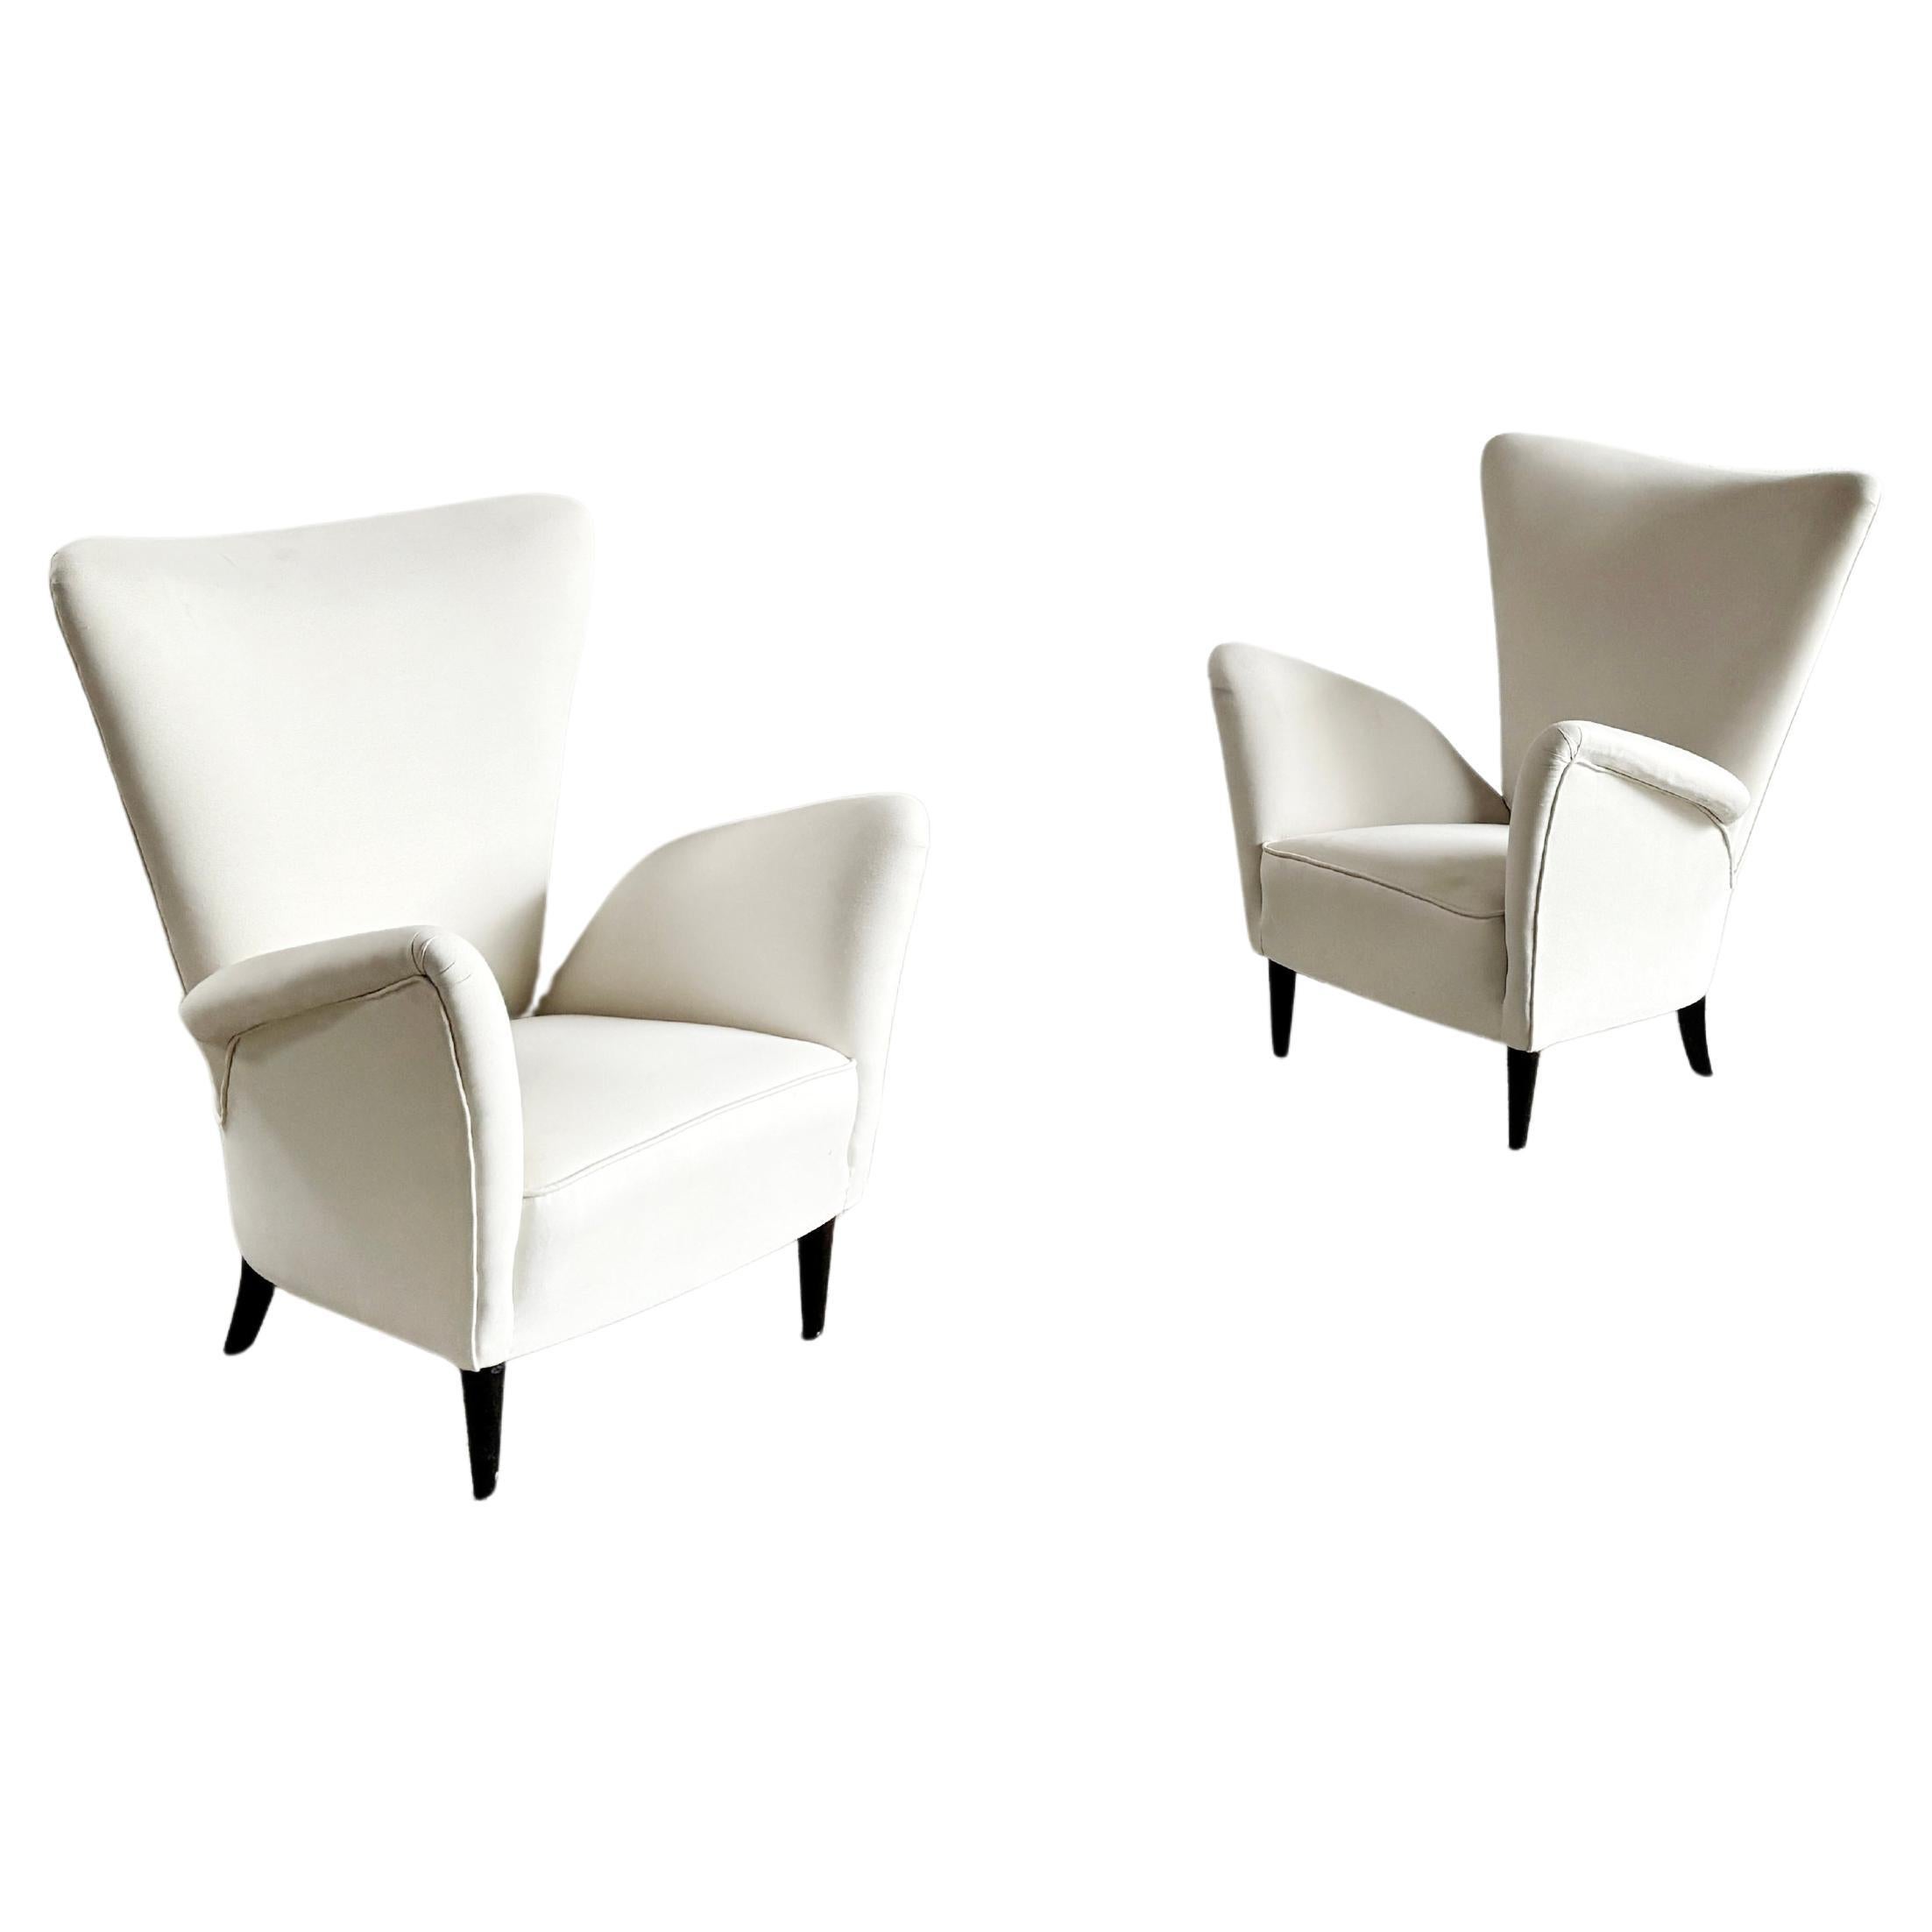 Italian Armchairs By Gio Ponti For Hotel Bristol Merano, 1950's For Sale